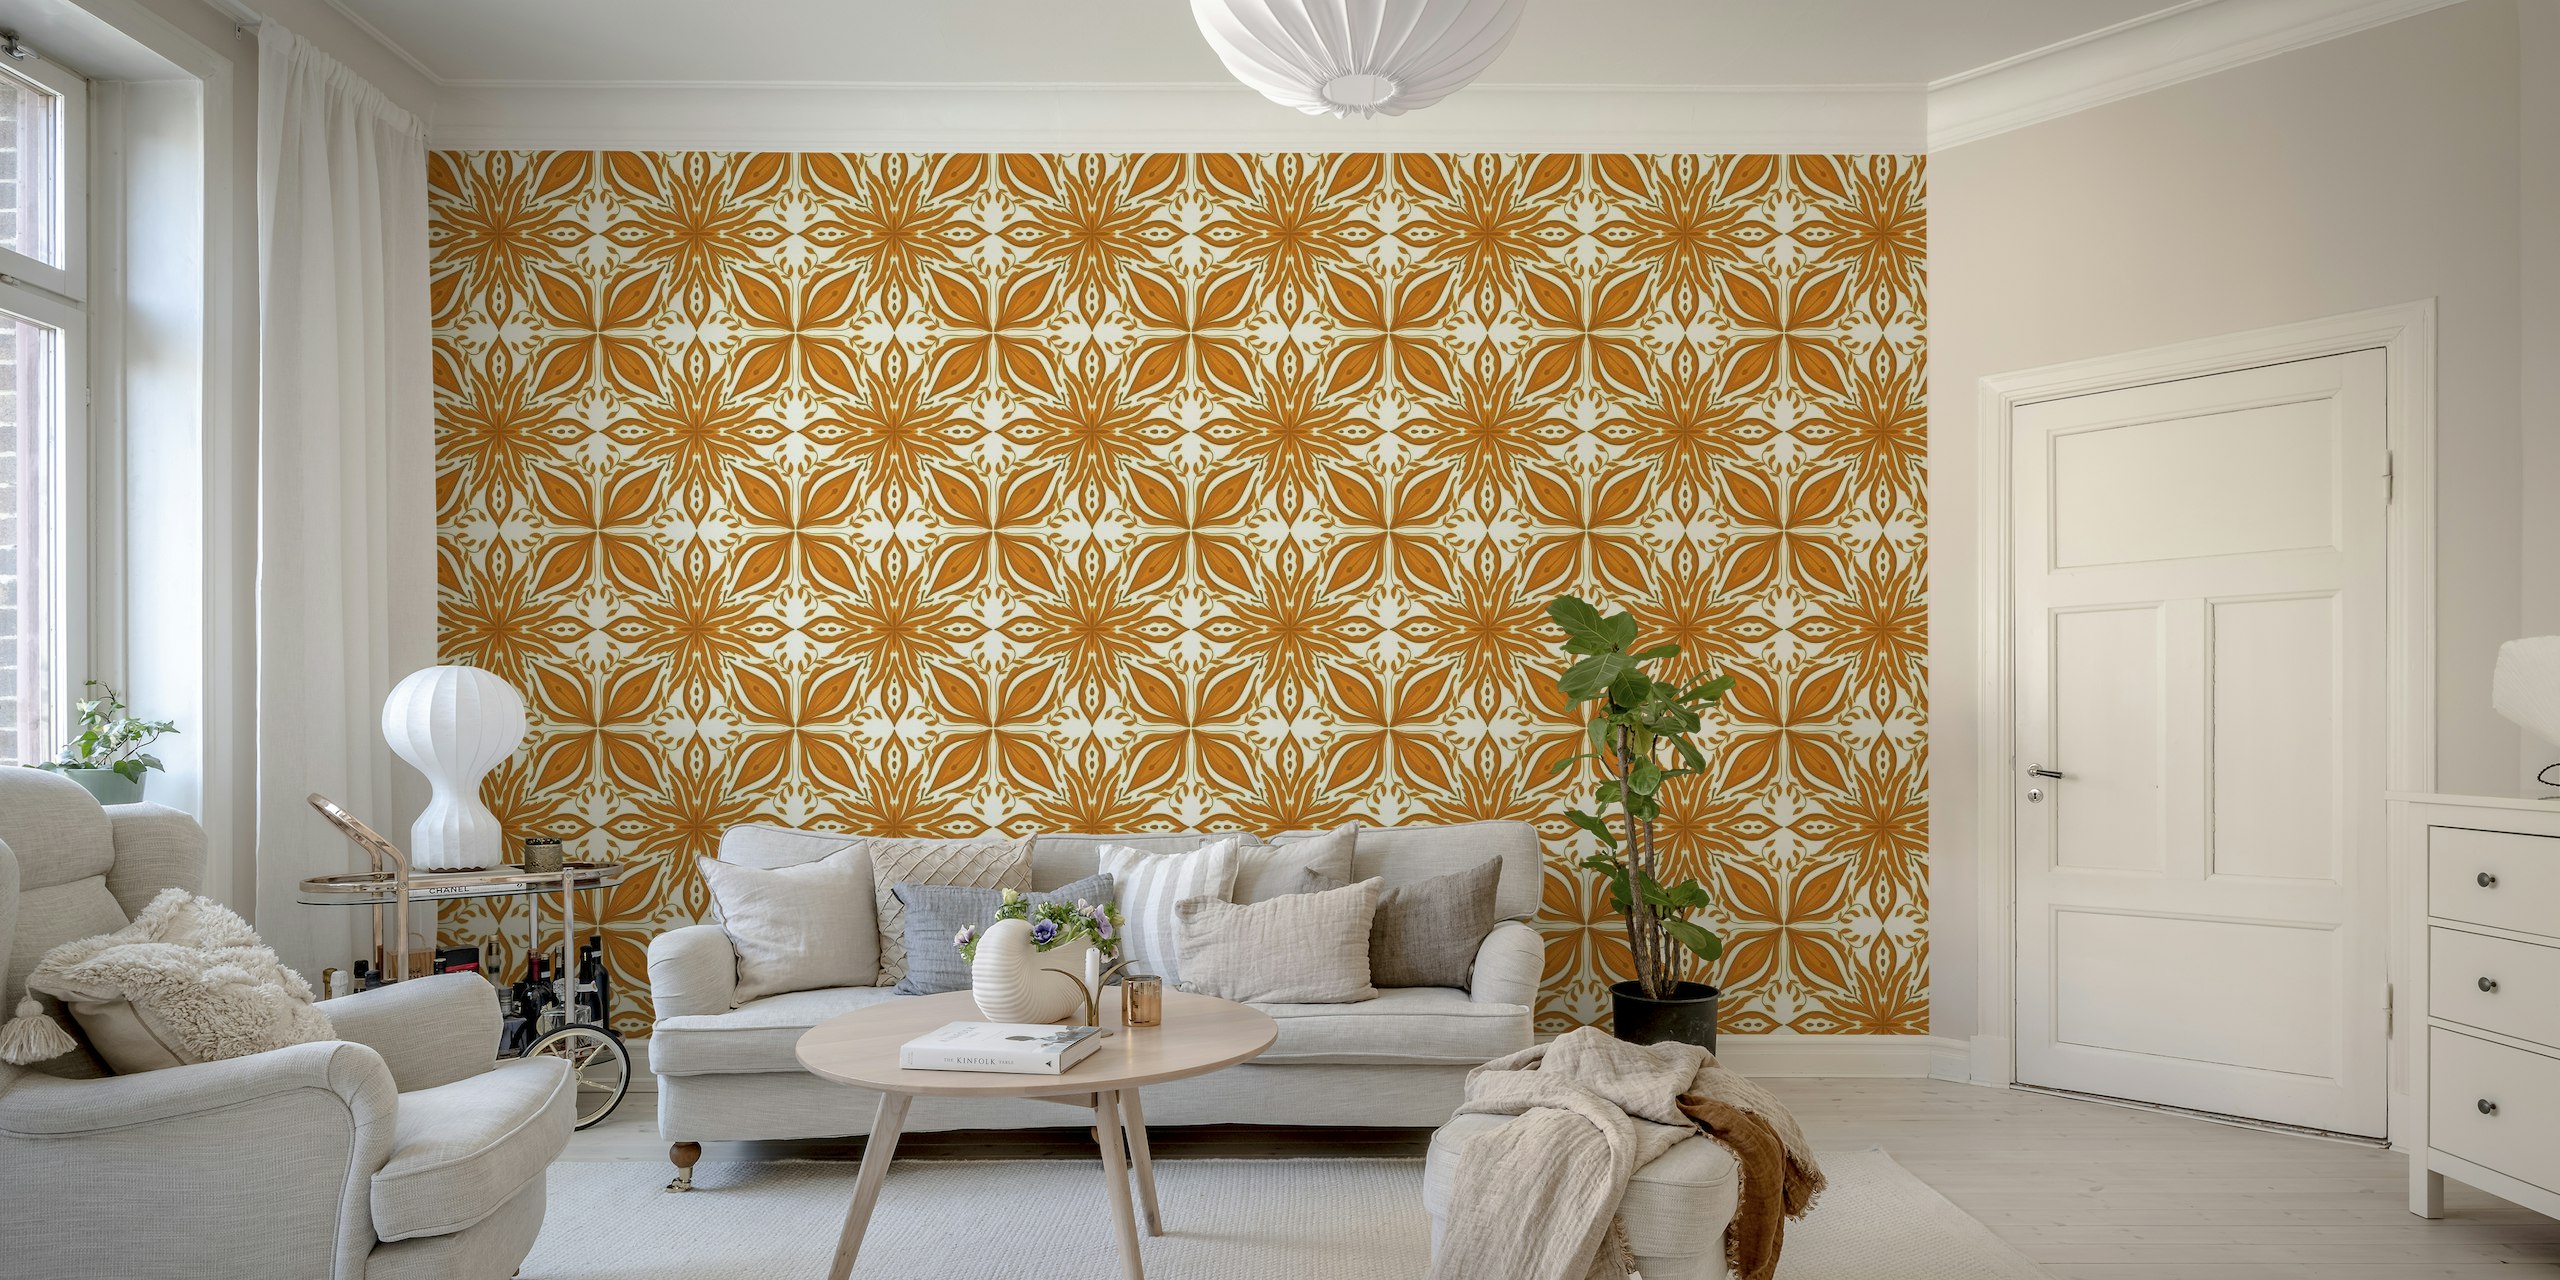 Ornate yellow and orange tile pattern wall mural